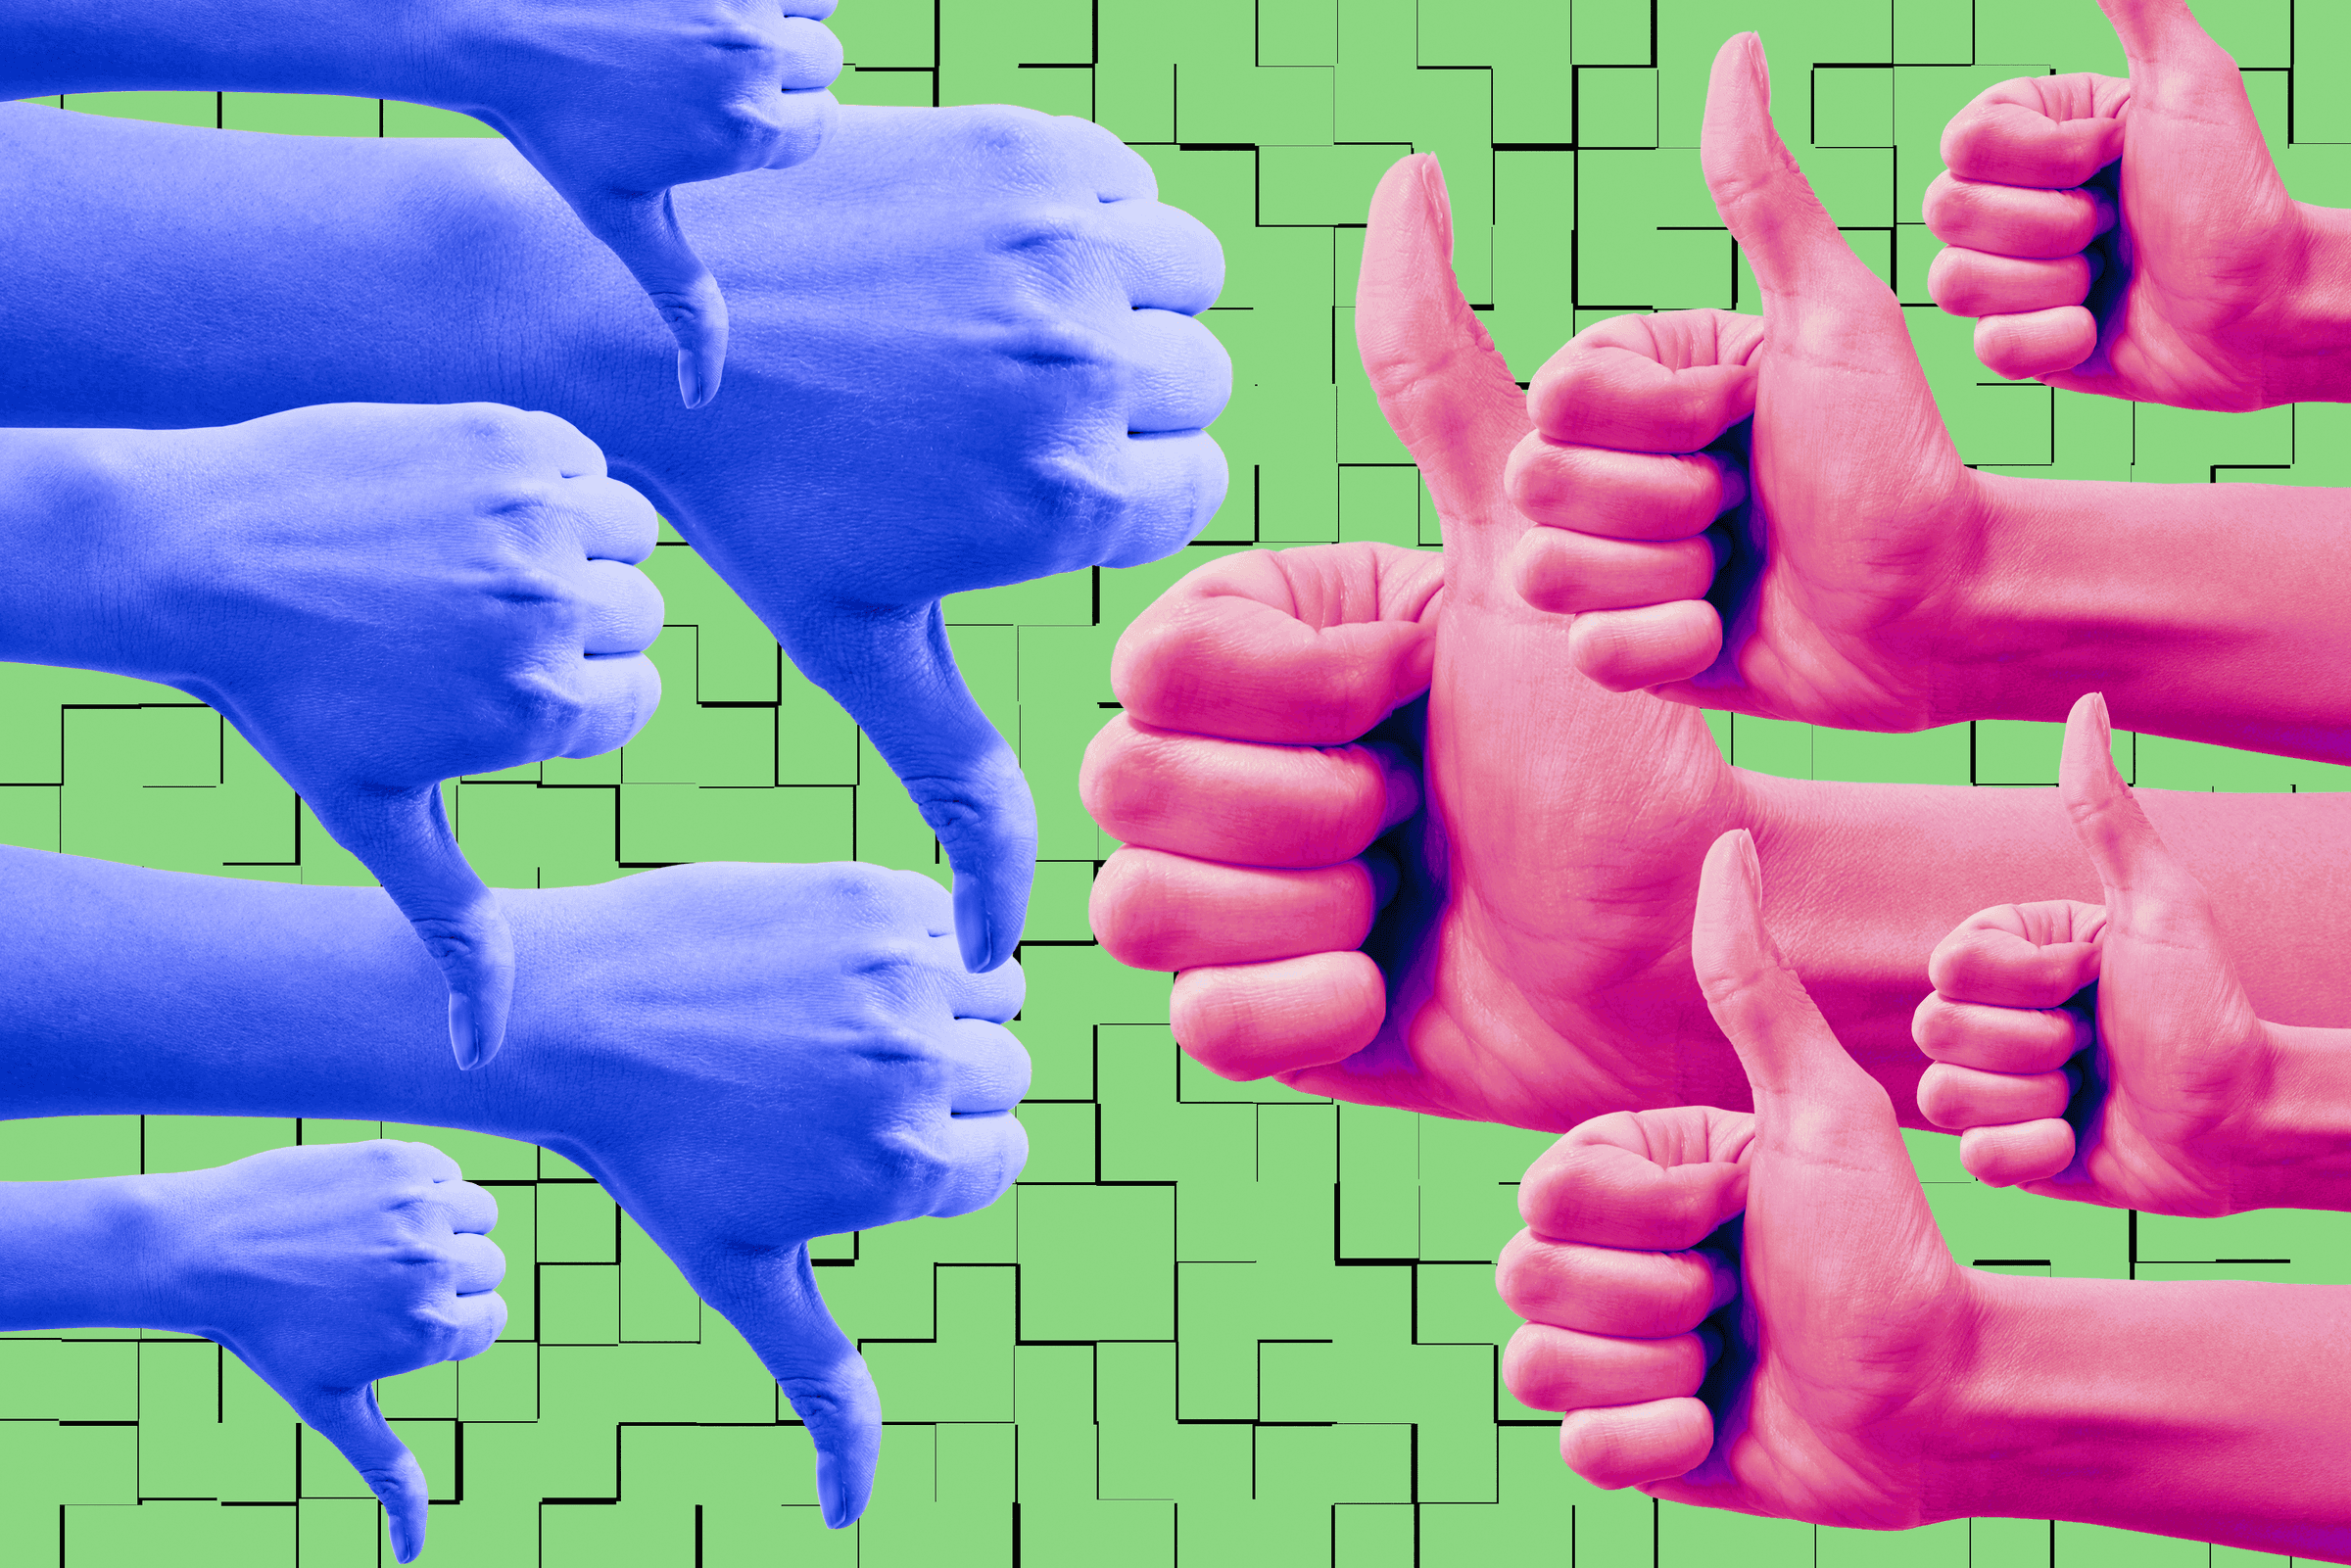 A collage-style illustration with a collection of photorealistic blue hands doing thumbs down and red hands giving thumbs up on the right side of the image on an illustrated green background.